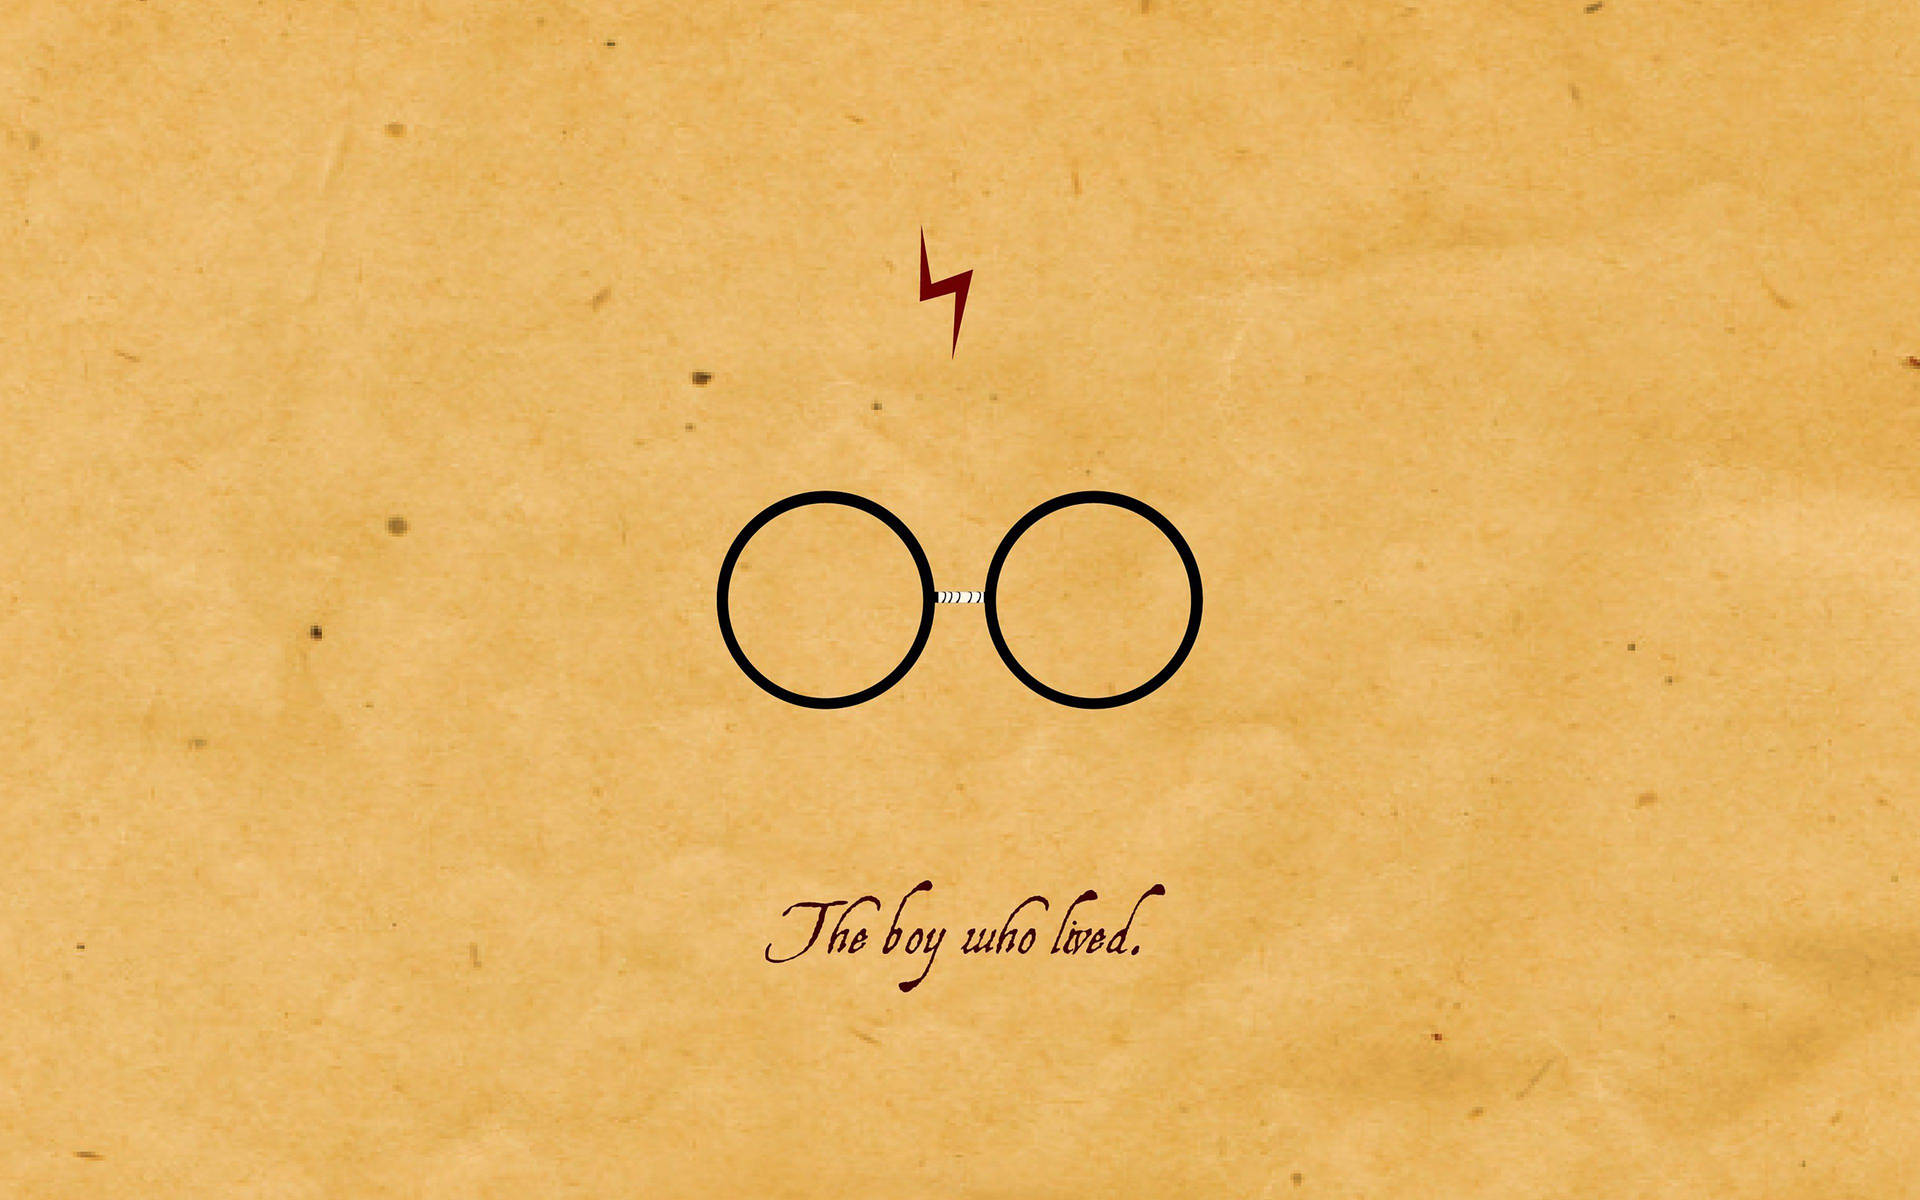 Free Harry Potter Wallpaper Downloads, [400+] Harry Potter Wallpapers for  FREE 